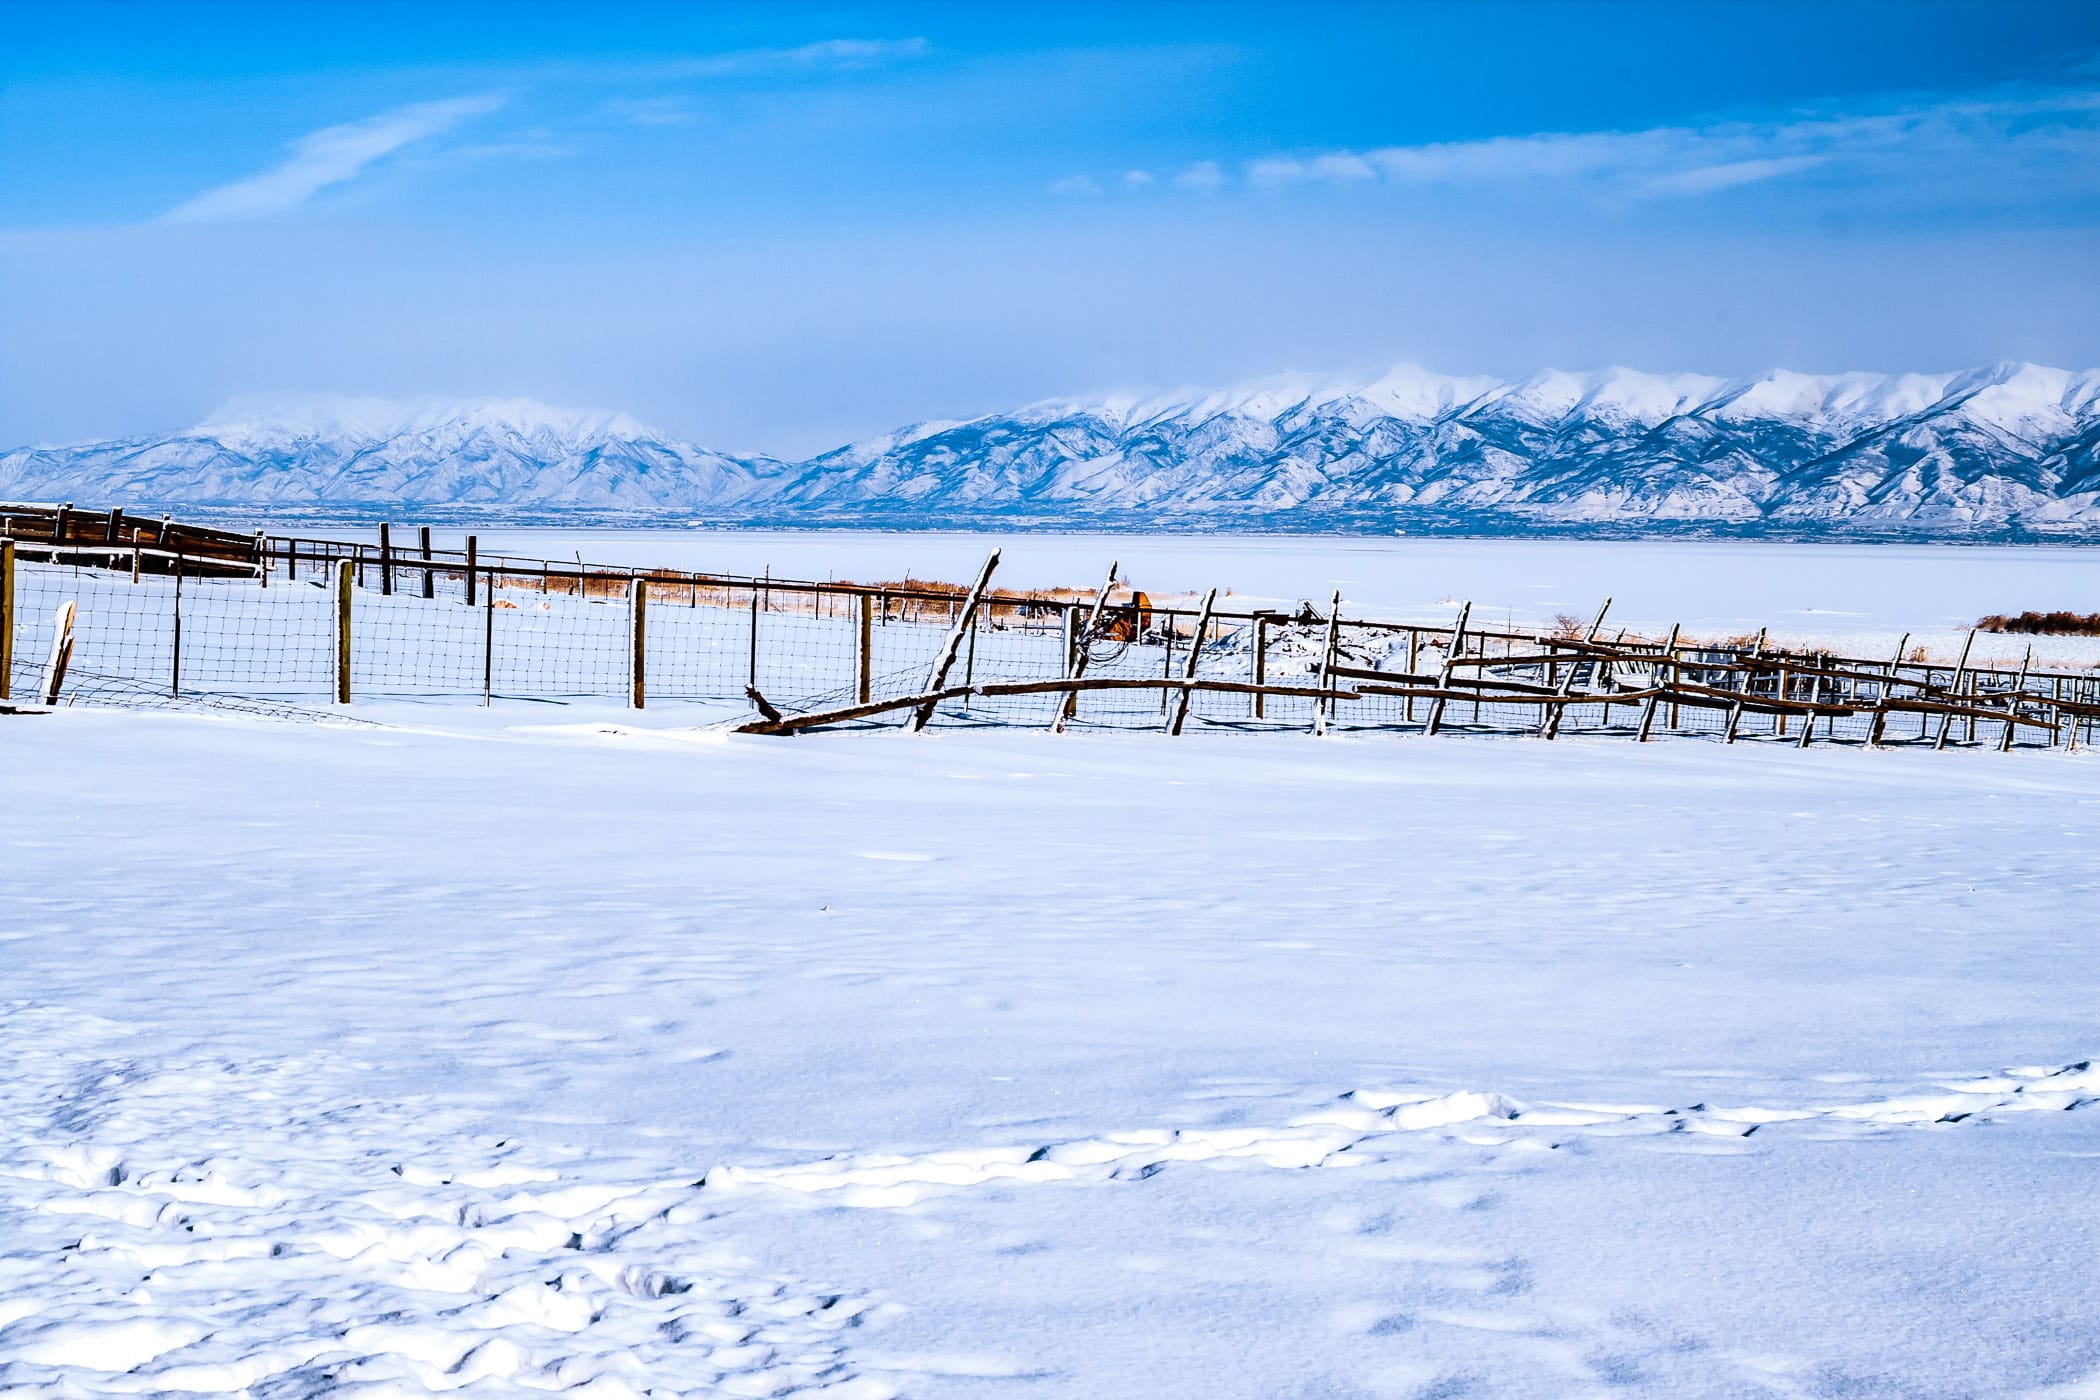 Utah's Wasatch Front as seen from Antelope Island State Park.